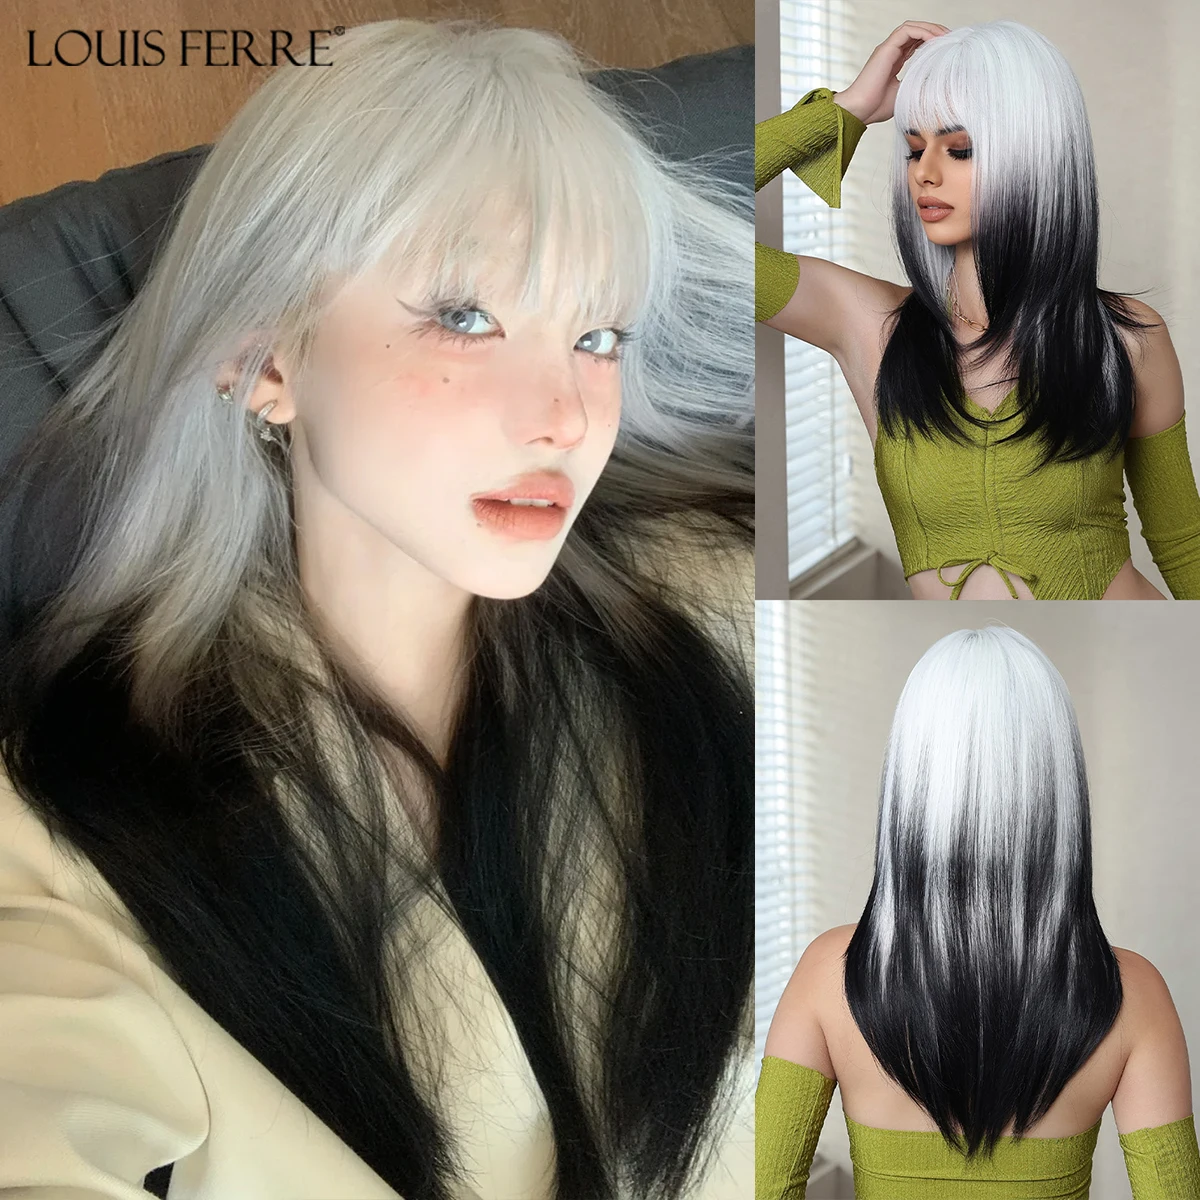 

LOUIS FERRE Long Straight Synthetic Wigs for Women White Black Ombre Layered Hair With Bangs Heat Resistant Fiber Wigs for Daily